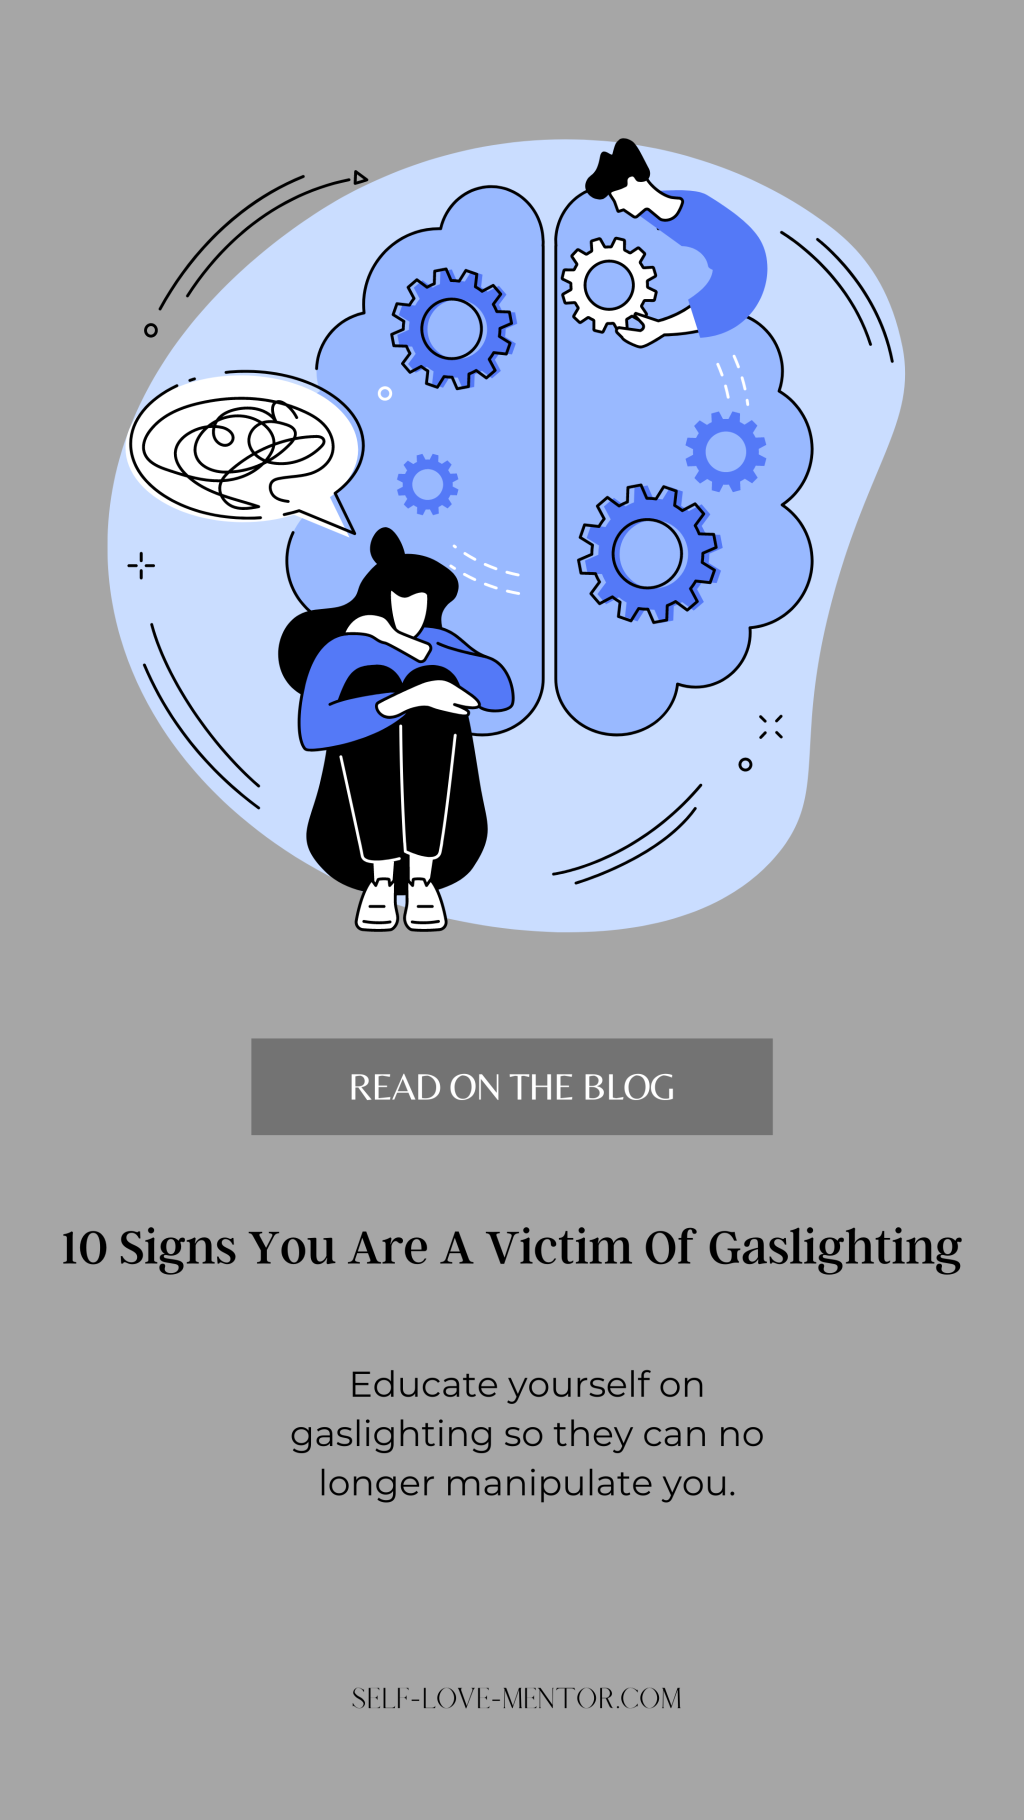 10 Signs You Are A Victim Of Gaslighting